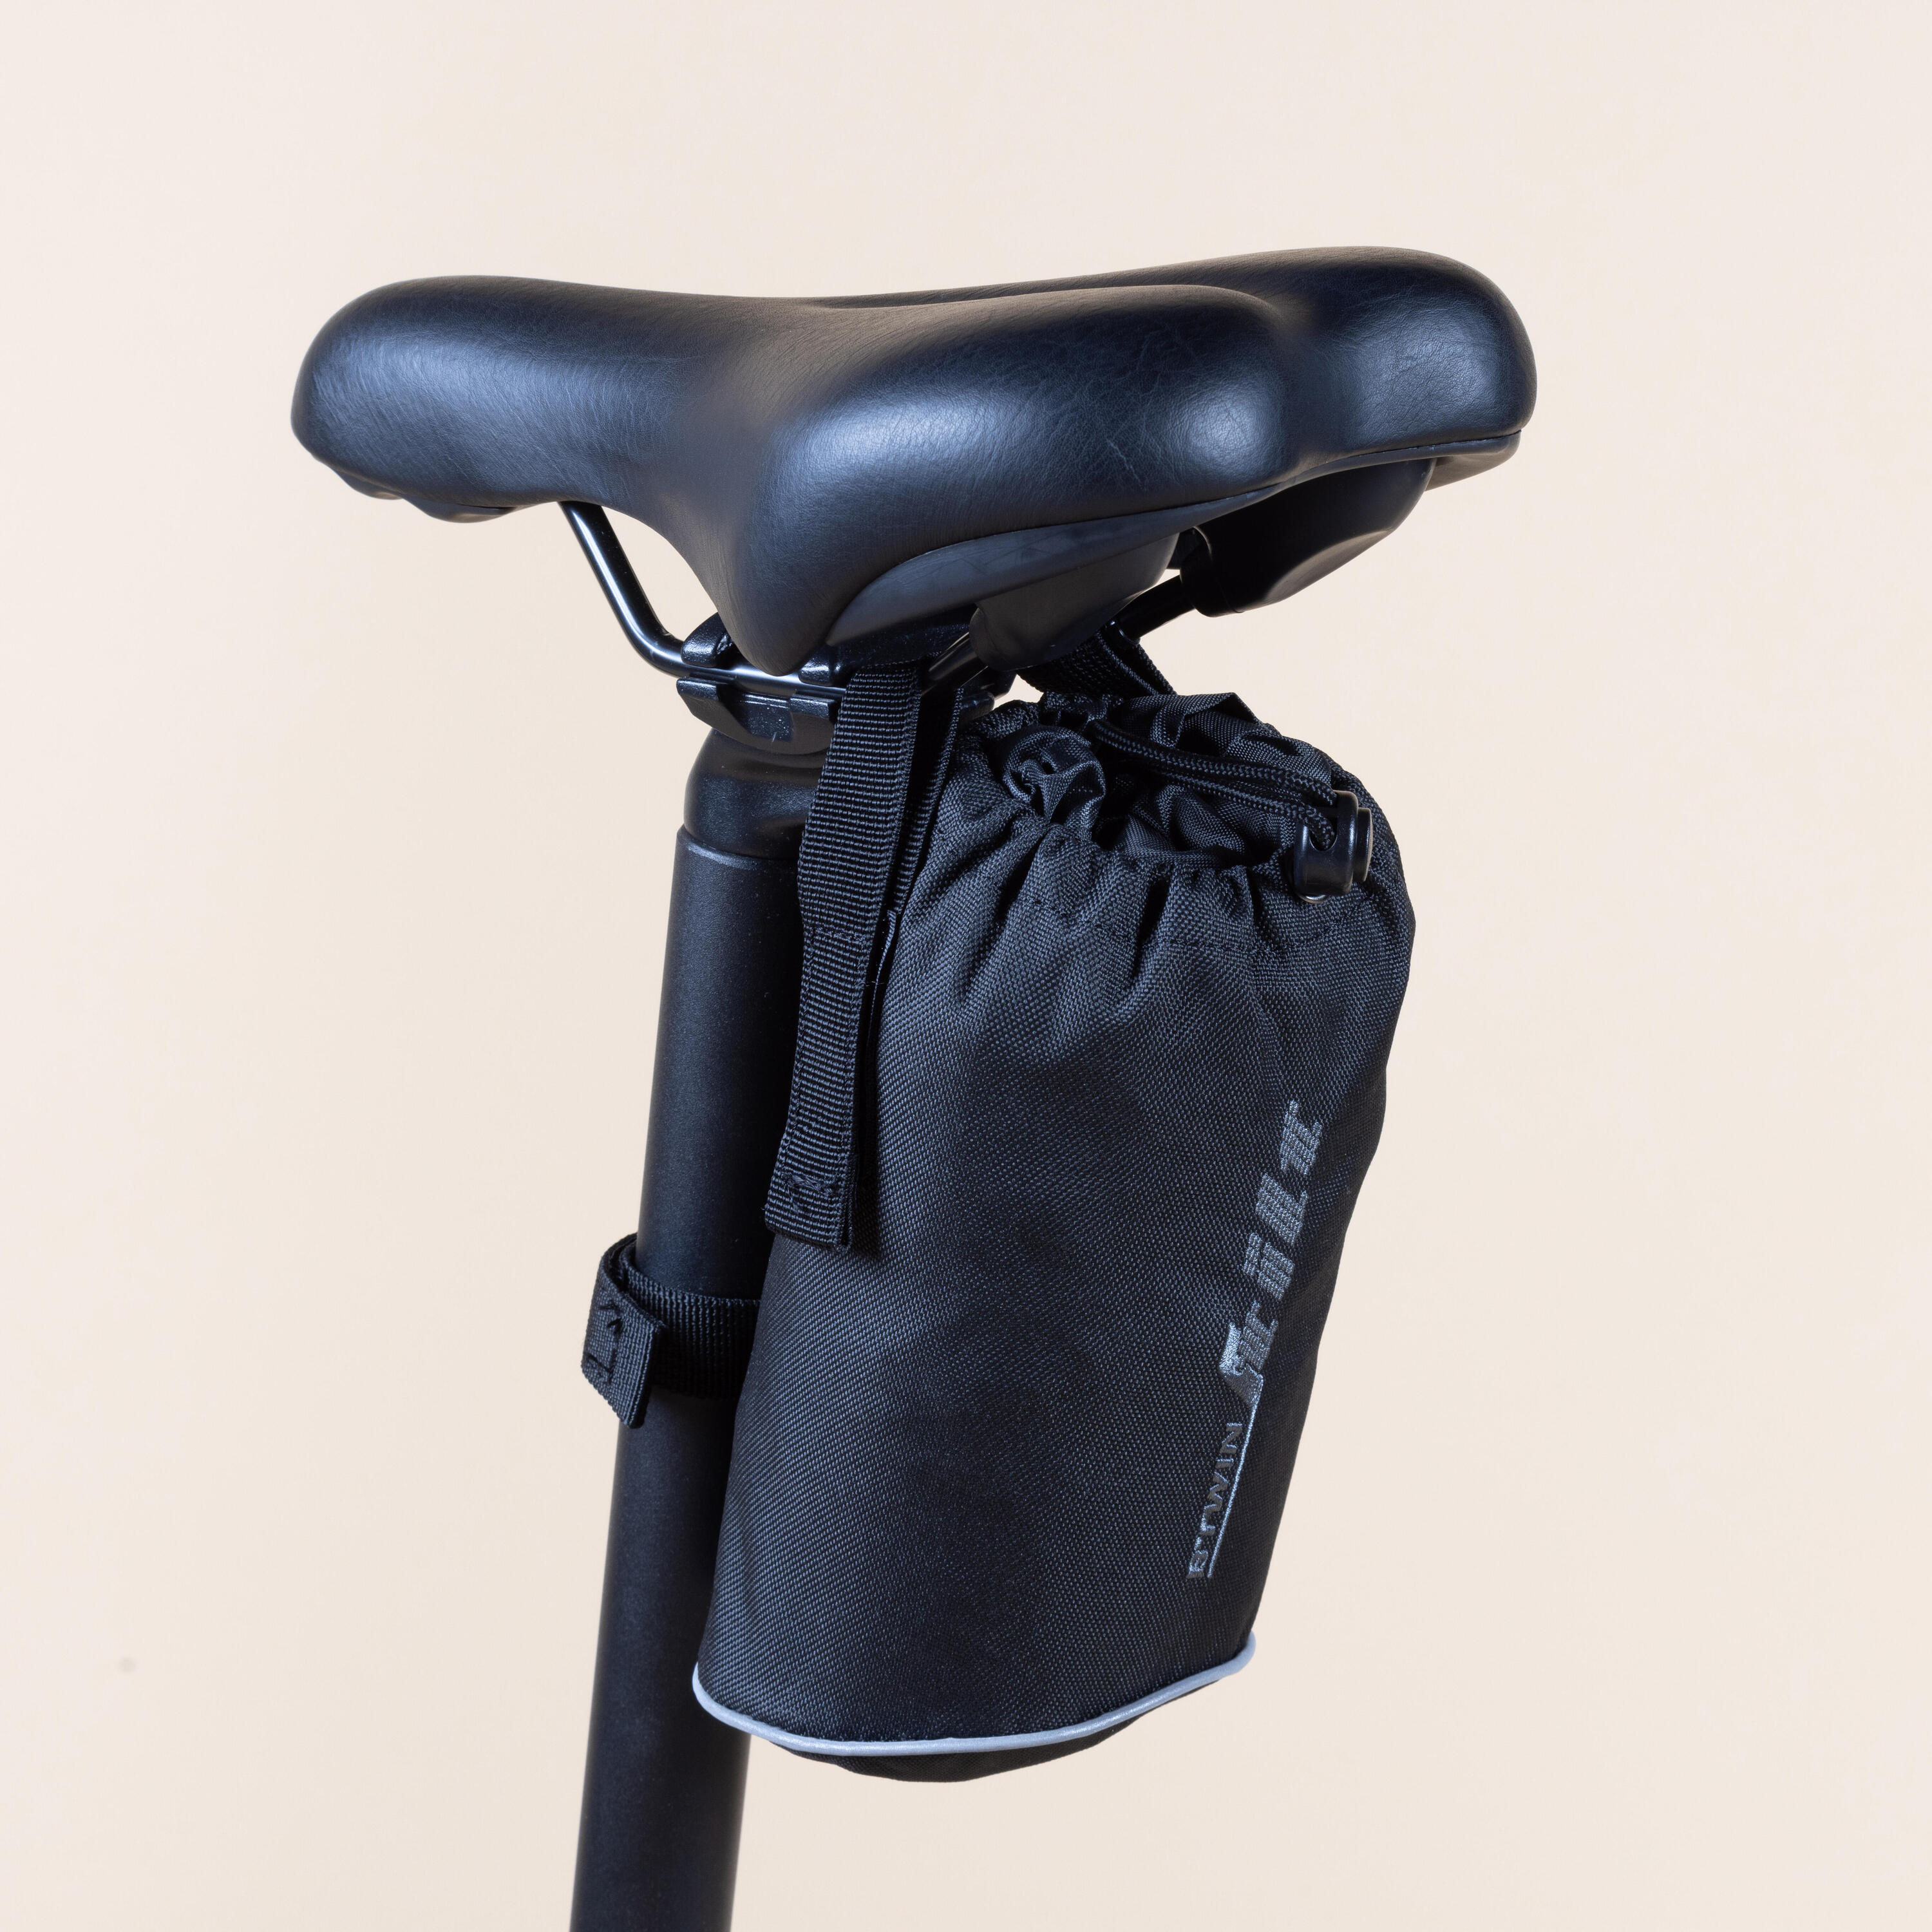 Folding Bike Protection Cover for Transport 4/9